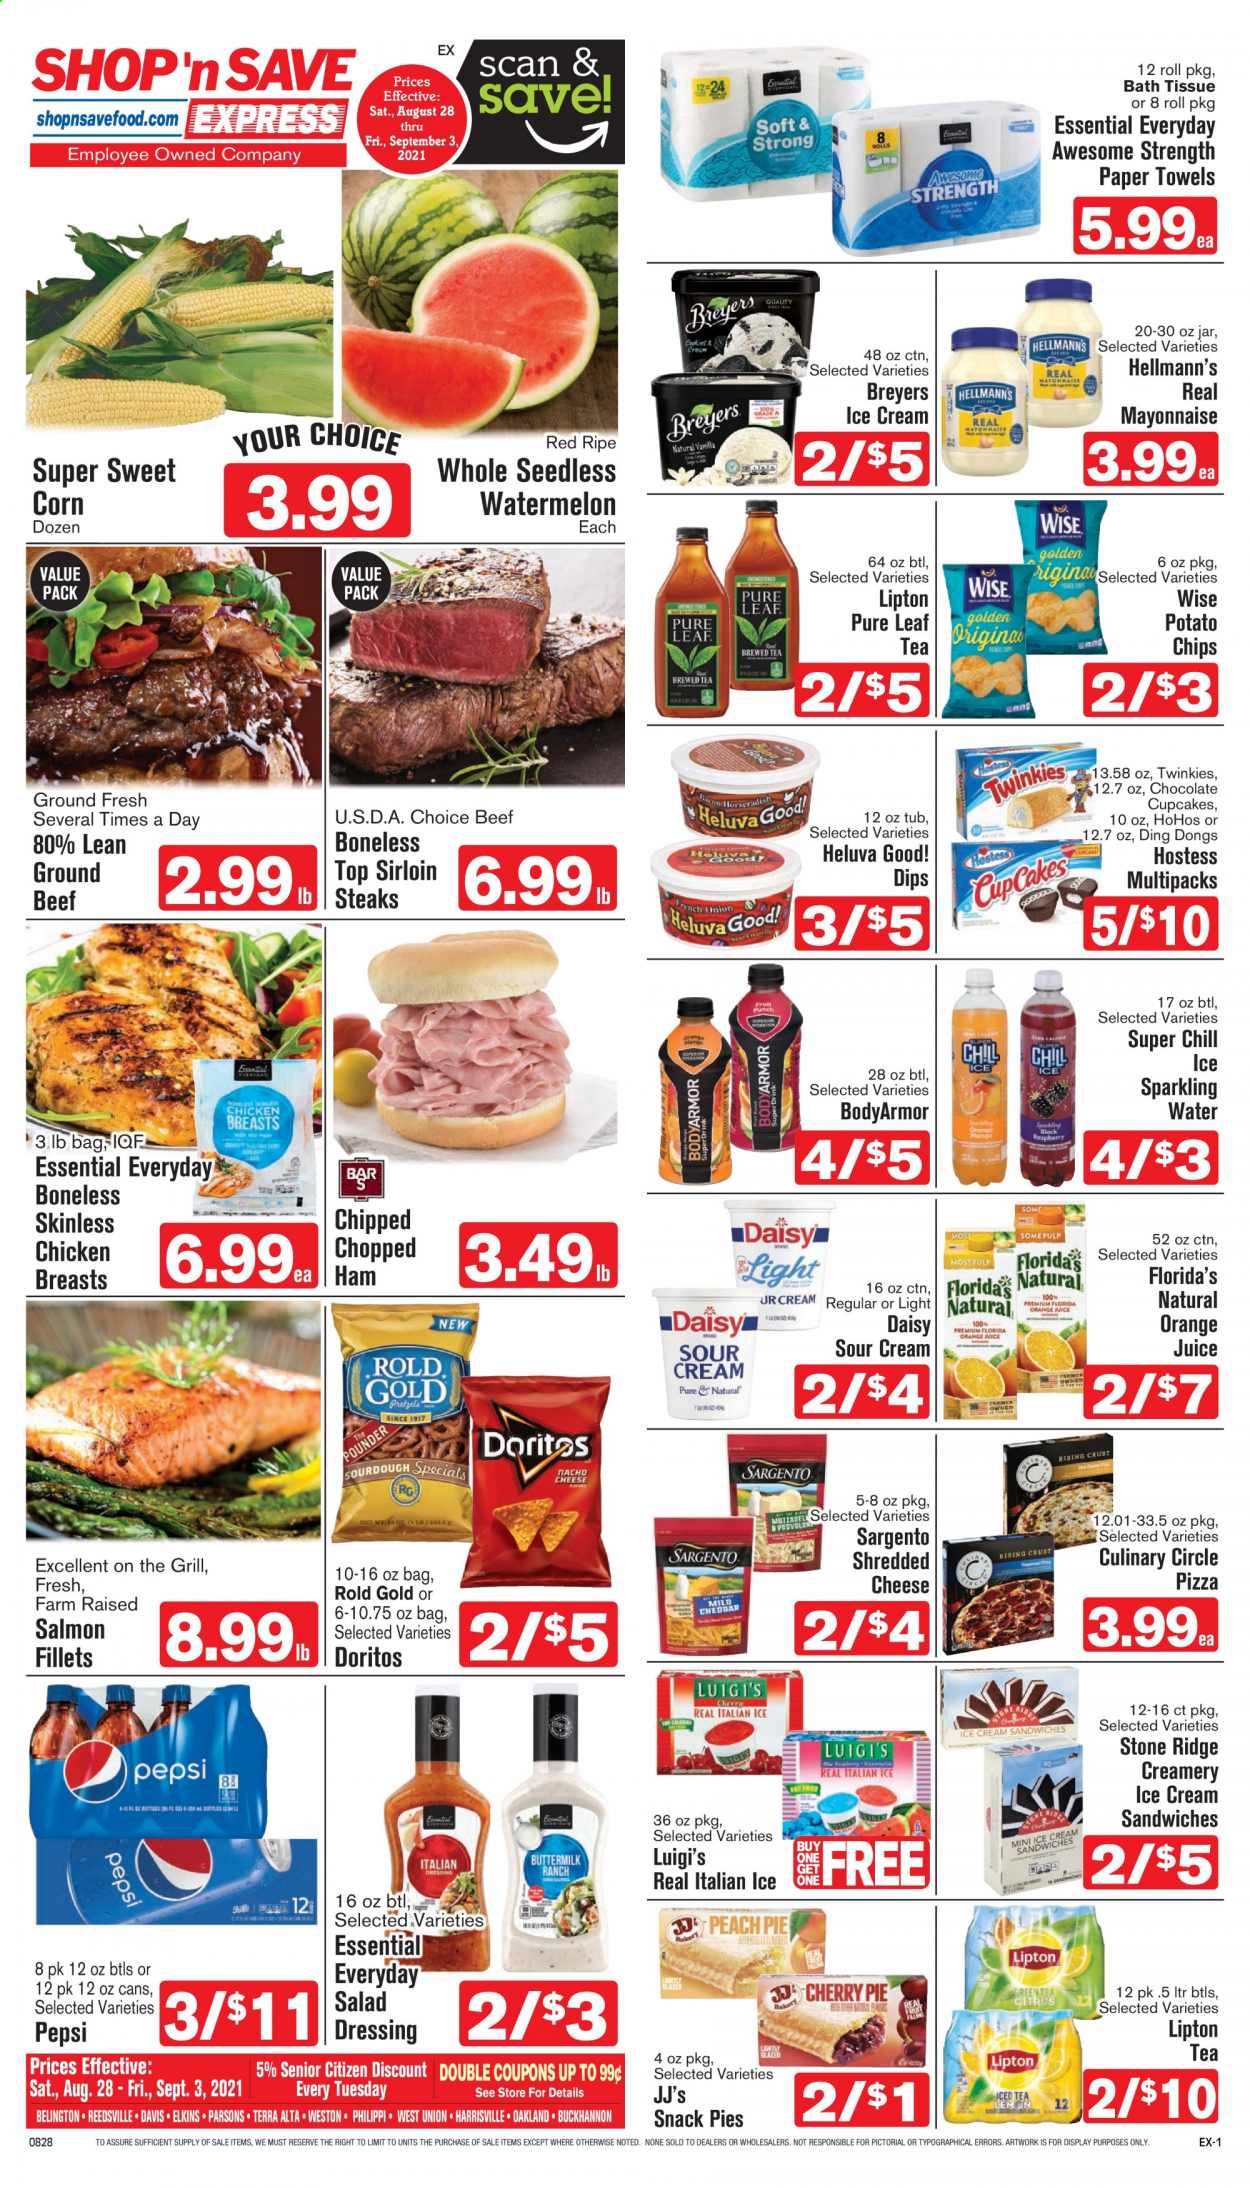 thumbnail - Shop ‘n Save Express Flyer - 08/28/2021 - 09/03/2021 - Sales products - cupcake, corn, sweet corn, watermelon, chicken breasts, beef meat, ground beef, steak, salmon, salmon fillet, pizza, ham, shredded cheese, Sargento, sour cream, mayonnaise, Hellmann’s, ice cream, ice cream sandwich, snack, Florida's Natural, Doritos, potato chips, chips, salad dressing, dressing, Pepsi, orange juice, juice, Lipton, sparkling water, tea, Pure Leaf, bath tissue, kitchen towels, paper towels. Page 1.